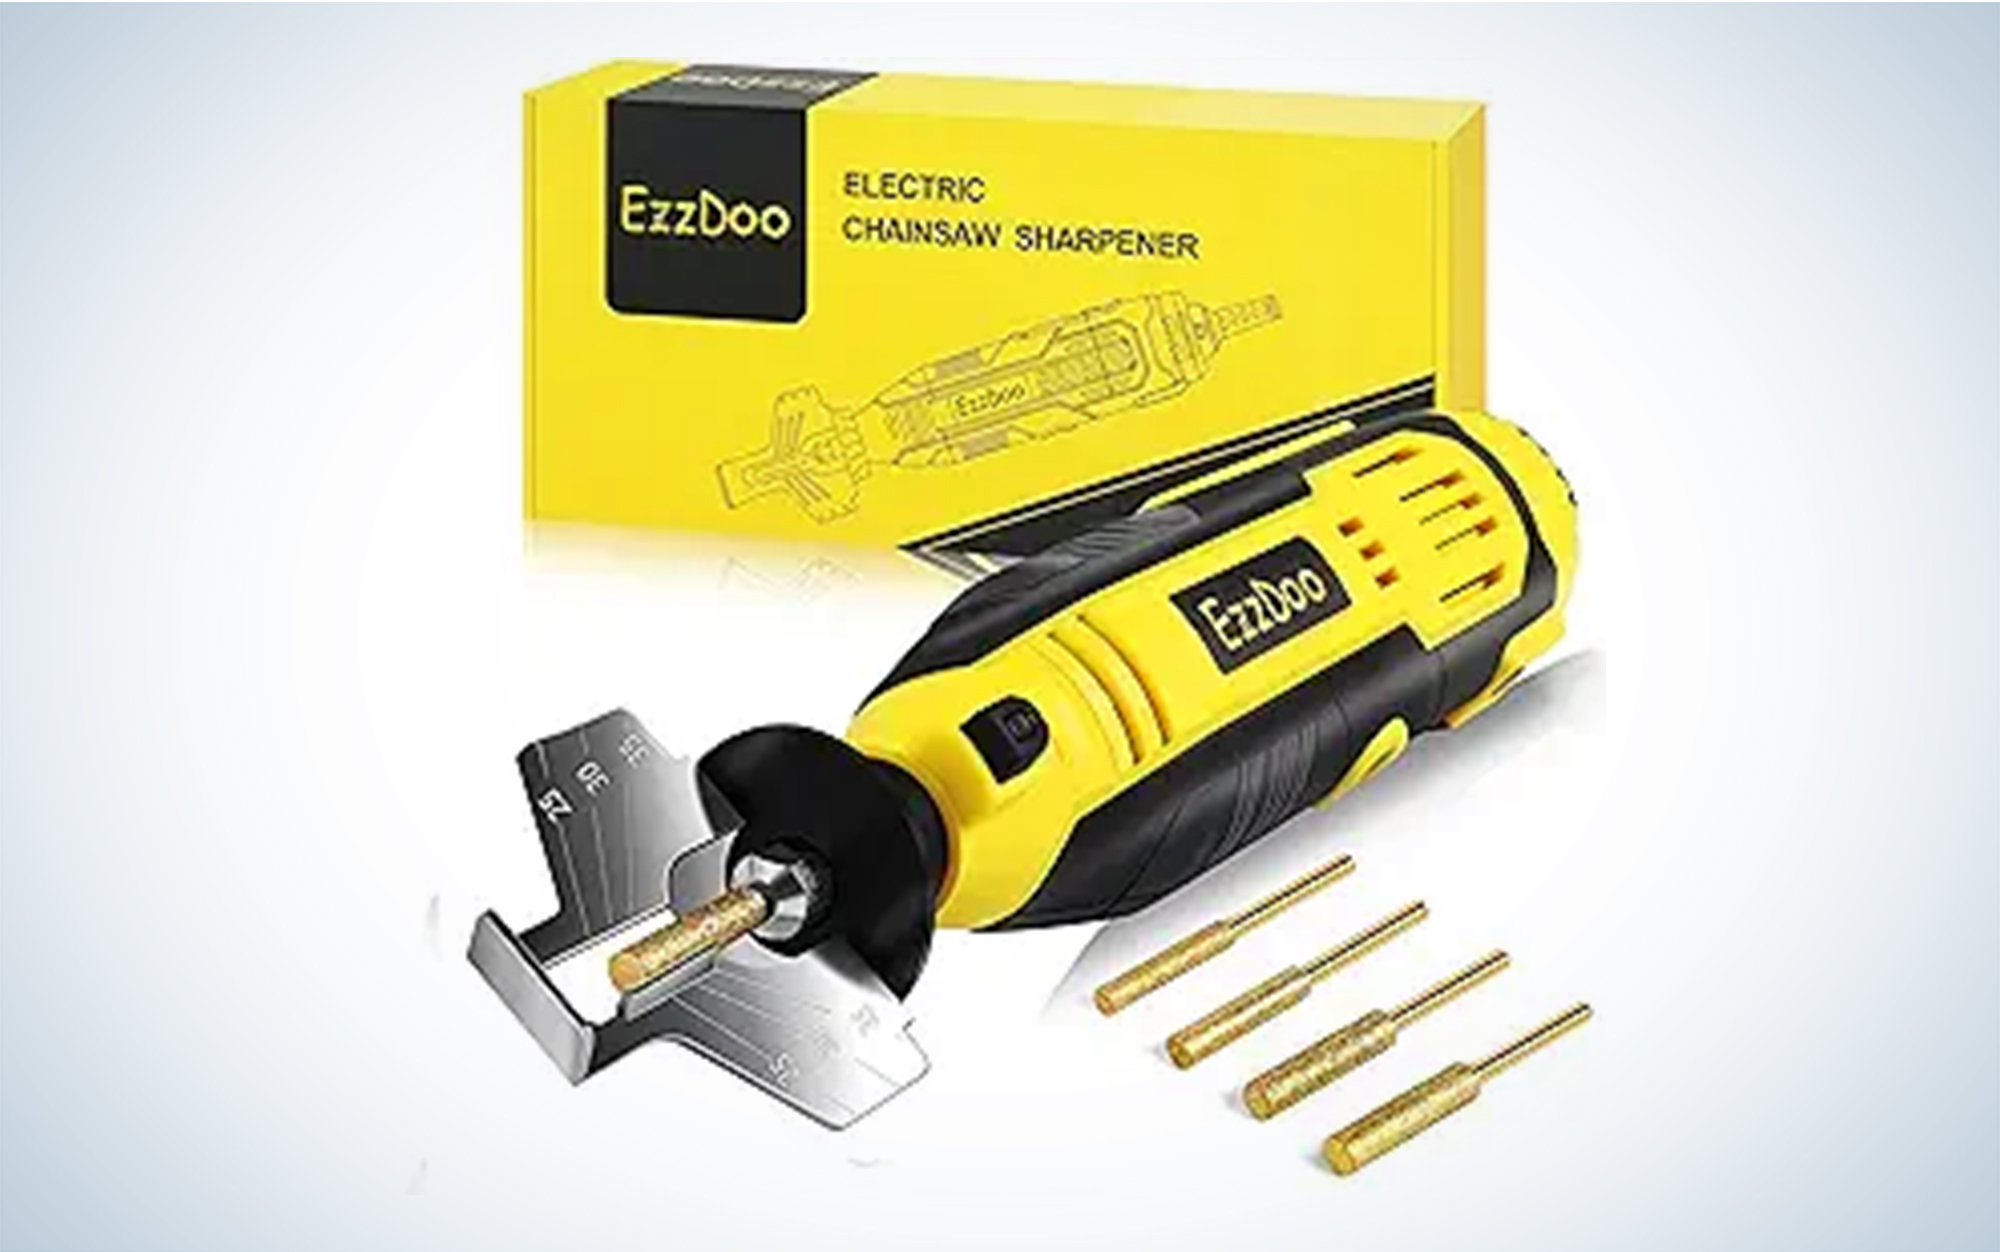 We tested the EzzDoo Electric Chainsaw Sharpener.